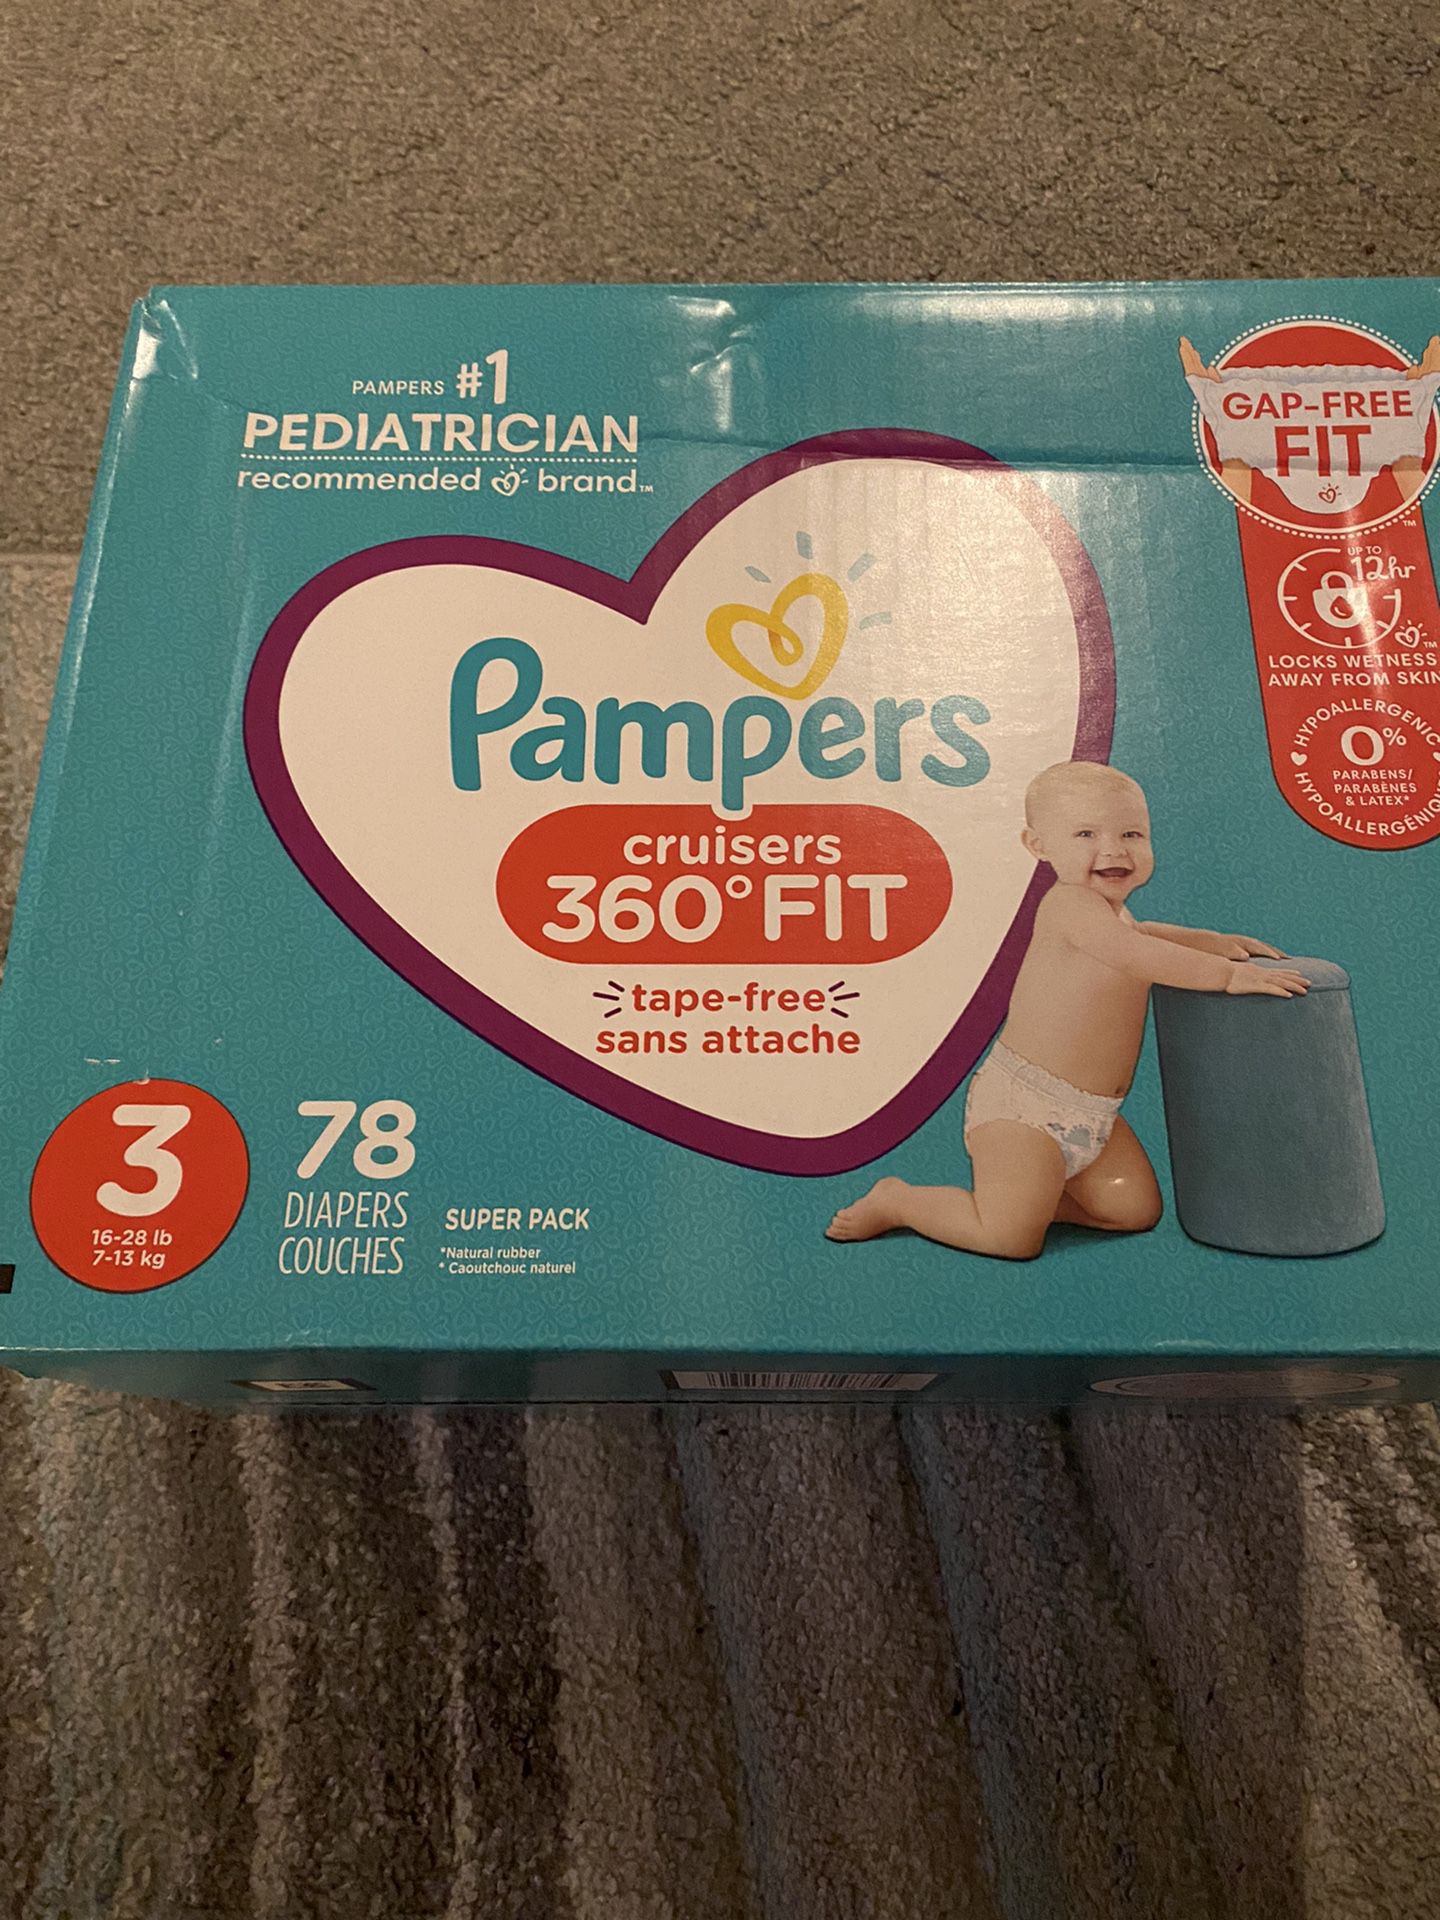 Pampers Cruiser 360 Fit 78 Diapers